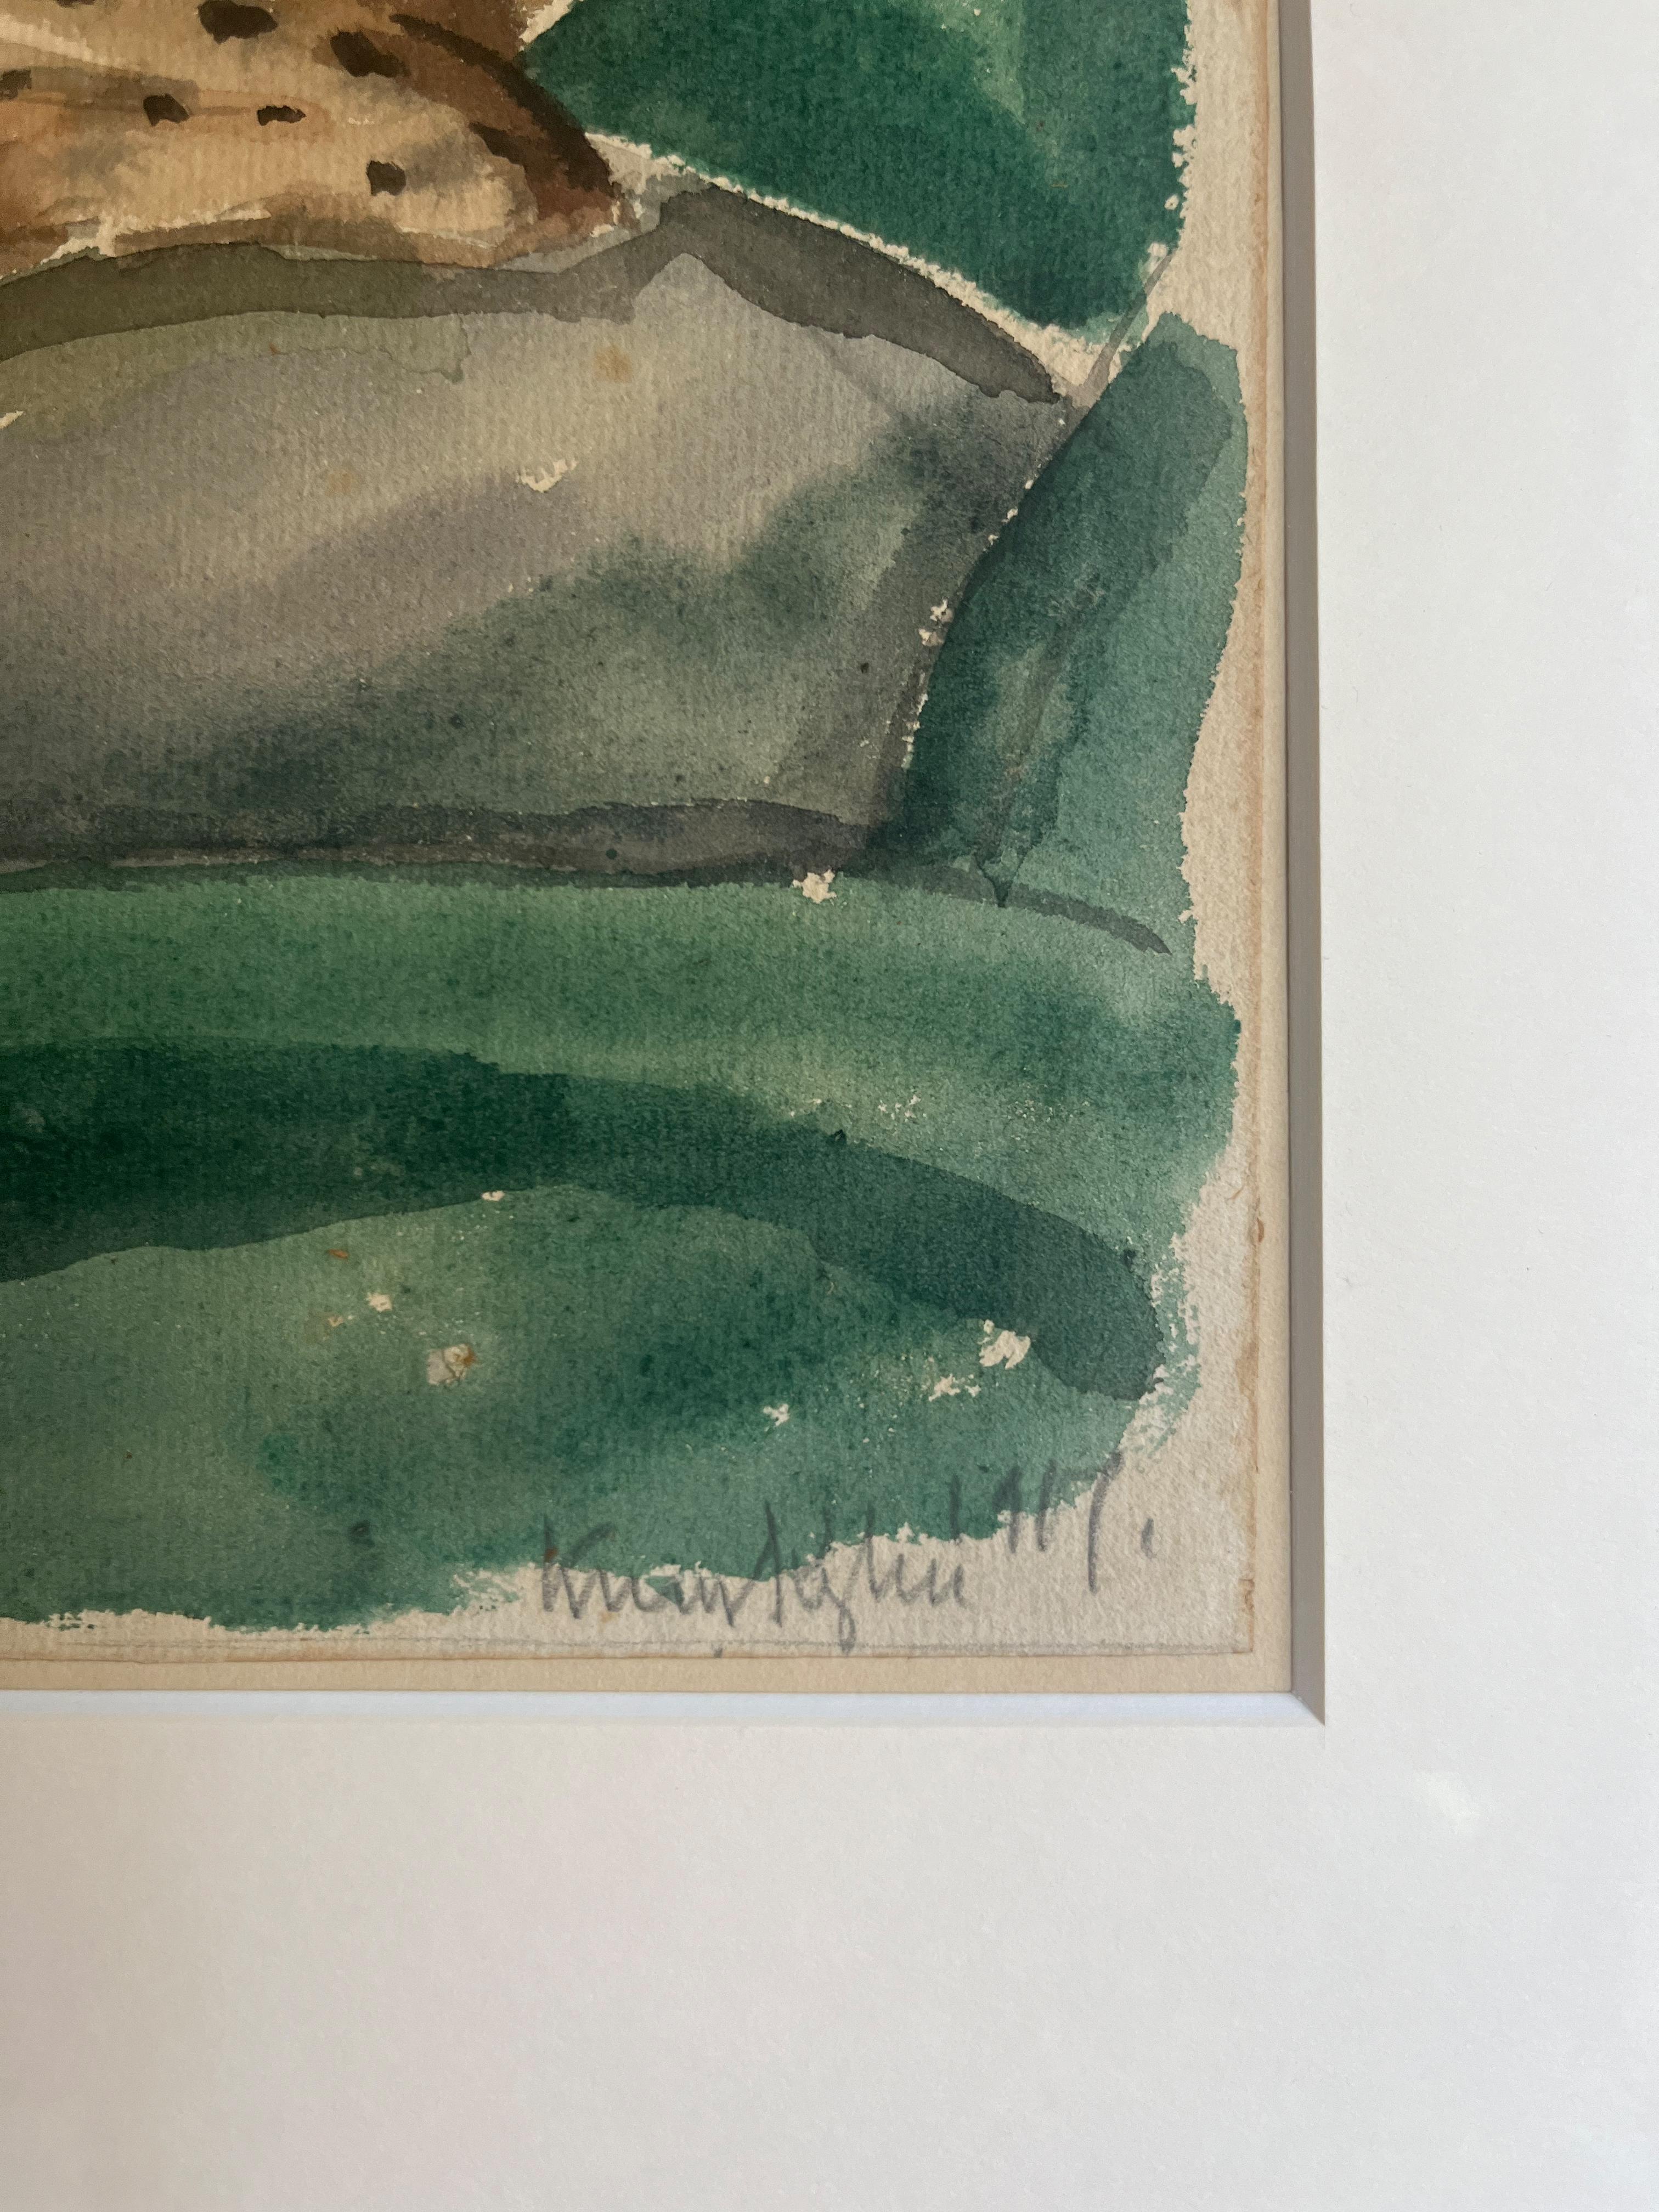 Composition by Knud Kyhn, 1917
Watercolour on paper. Sheet size 30×38 cm, signed and framed.

Knud Kyhn (1880 - 1969) was a Danish painter, illustrator and ceramic sculptor who is especially known for his animal figurines, which he created through